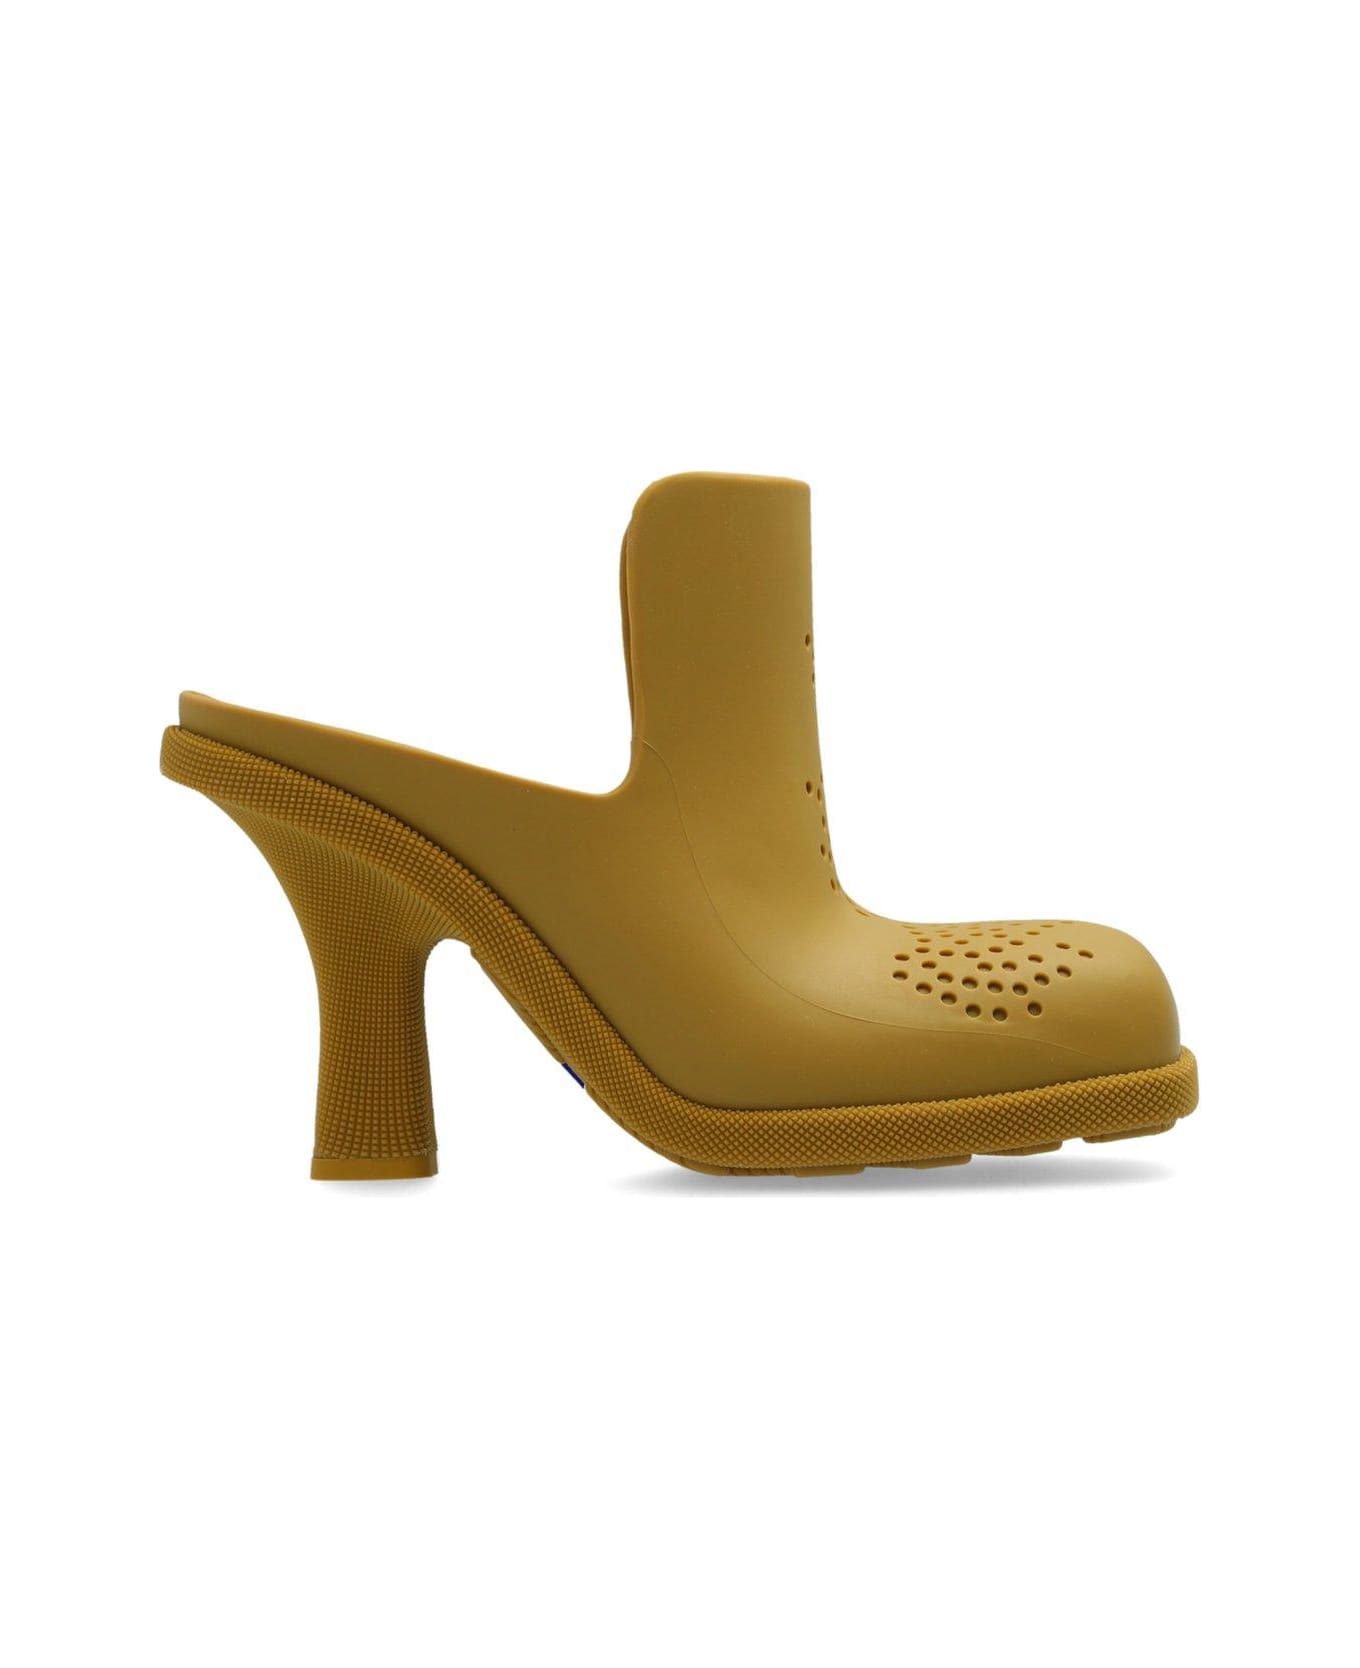 Burberry Highland Perforated Detailed Mules - YELLOW